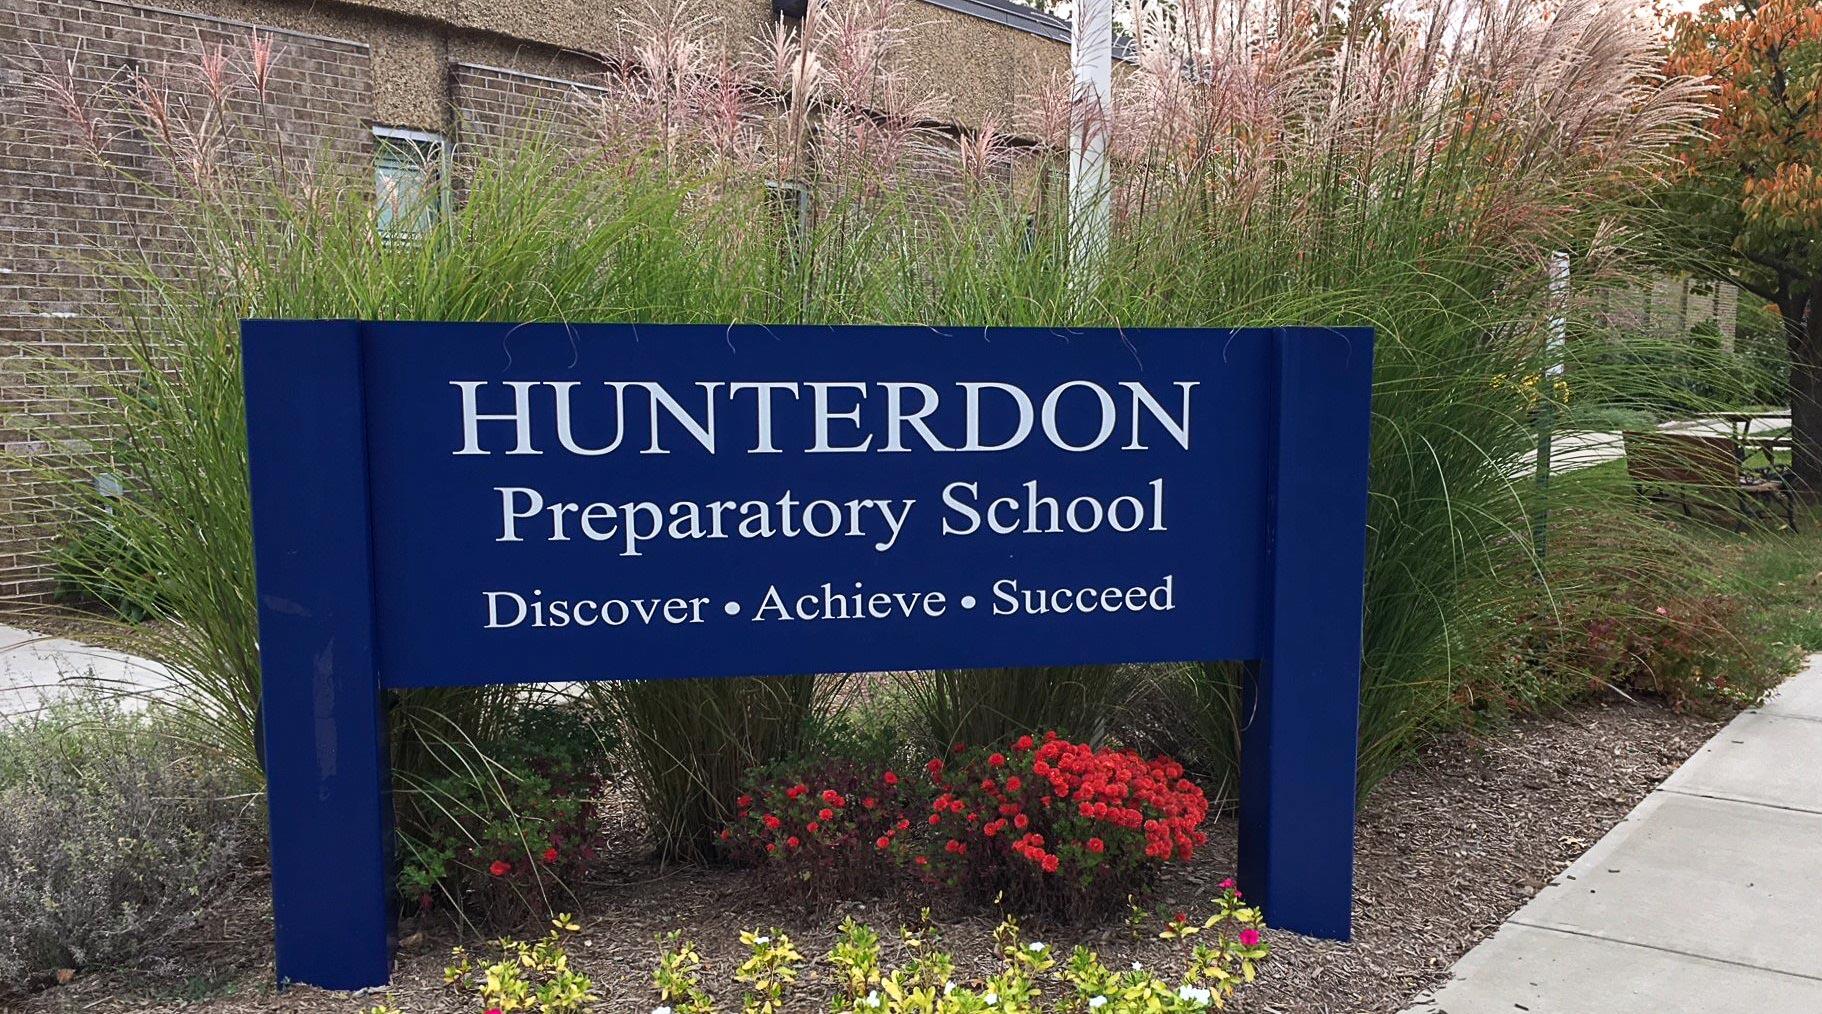 A picture of Hunterdon Preparatory School showing the entrance and school sign